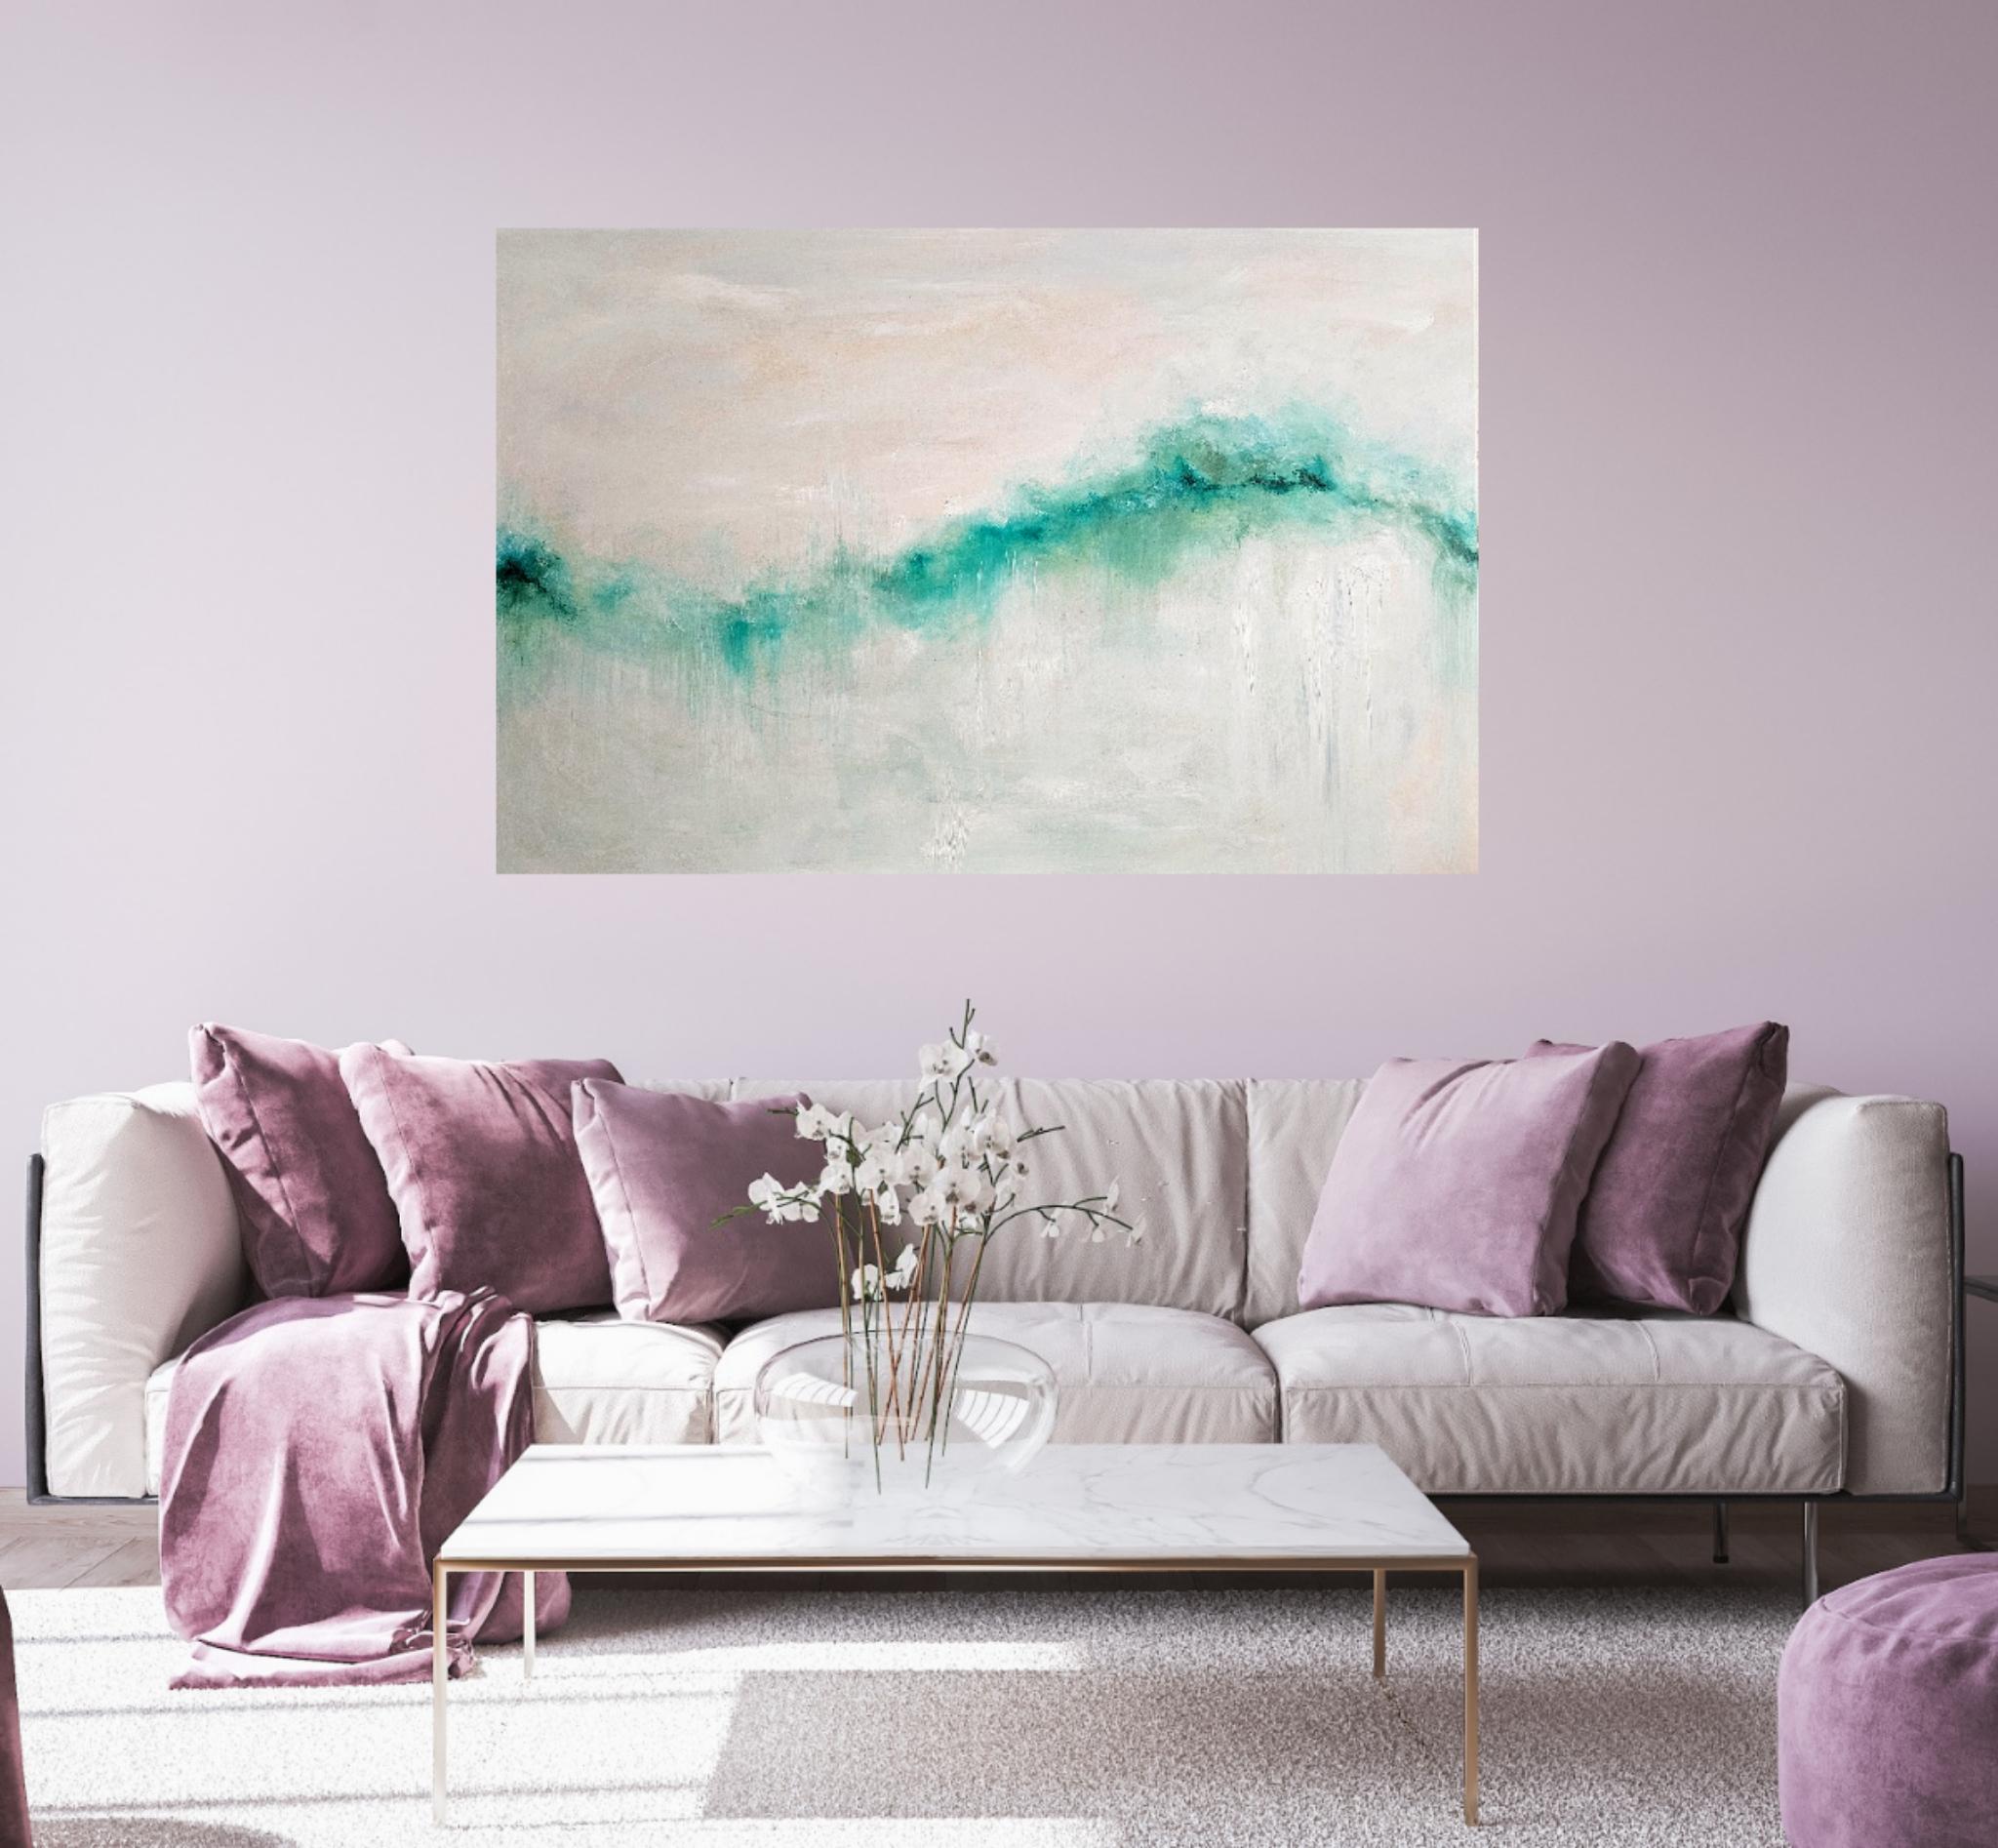 I dreamt of the sea - Large abstract seascape painting For Sale 6